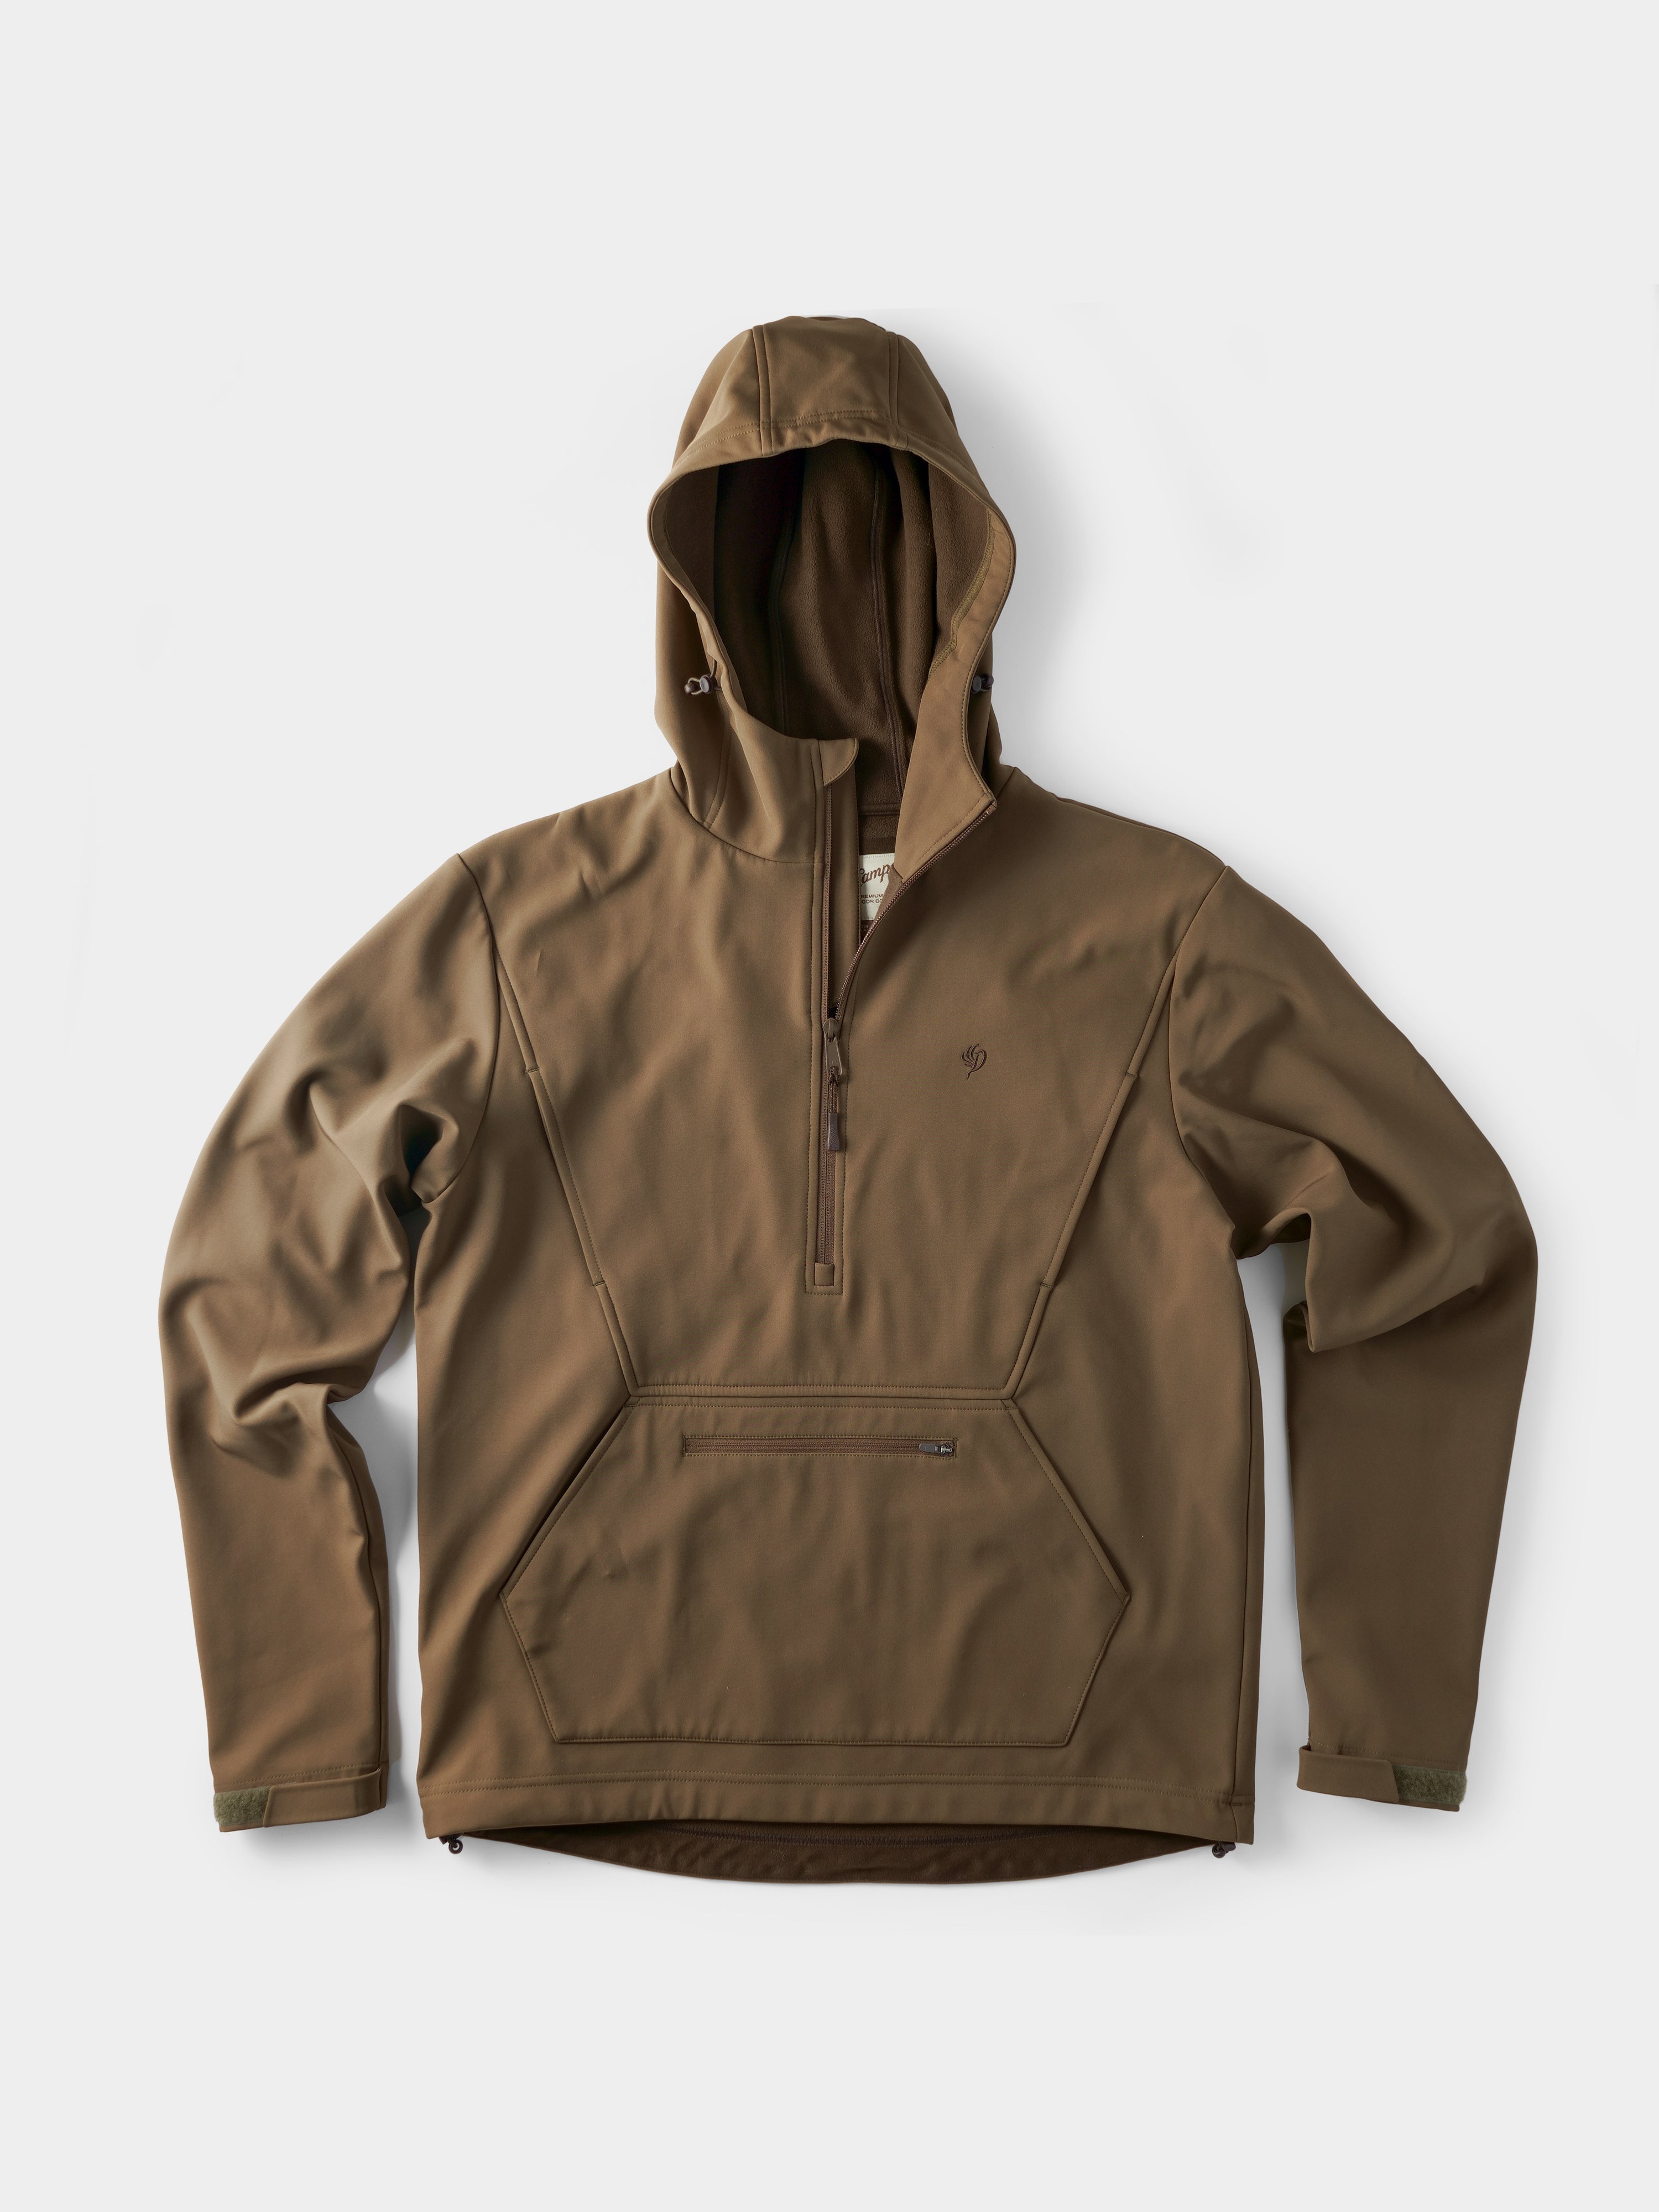 Contact Softshell Hoodie - Pin Oak – Duck Camp